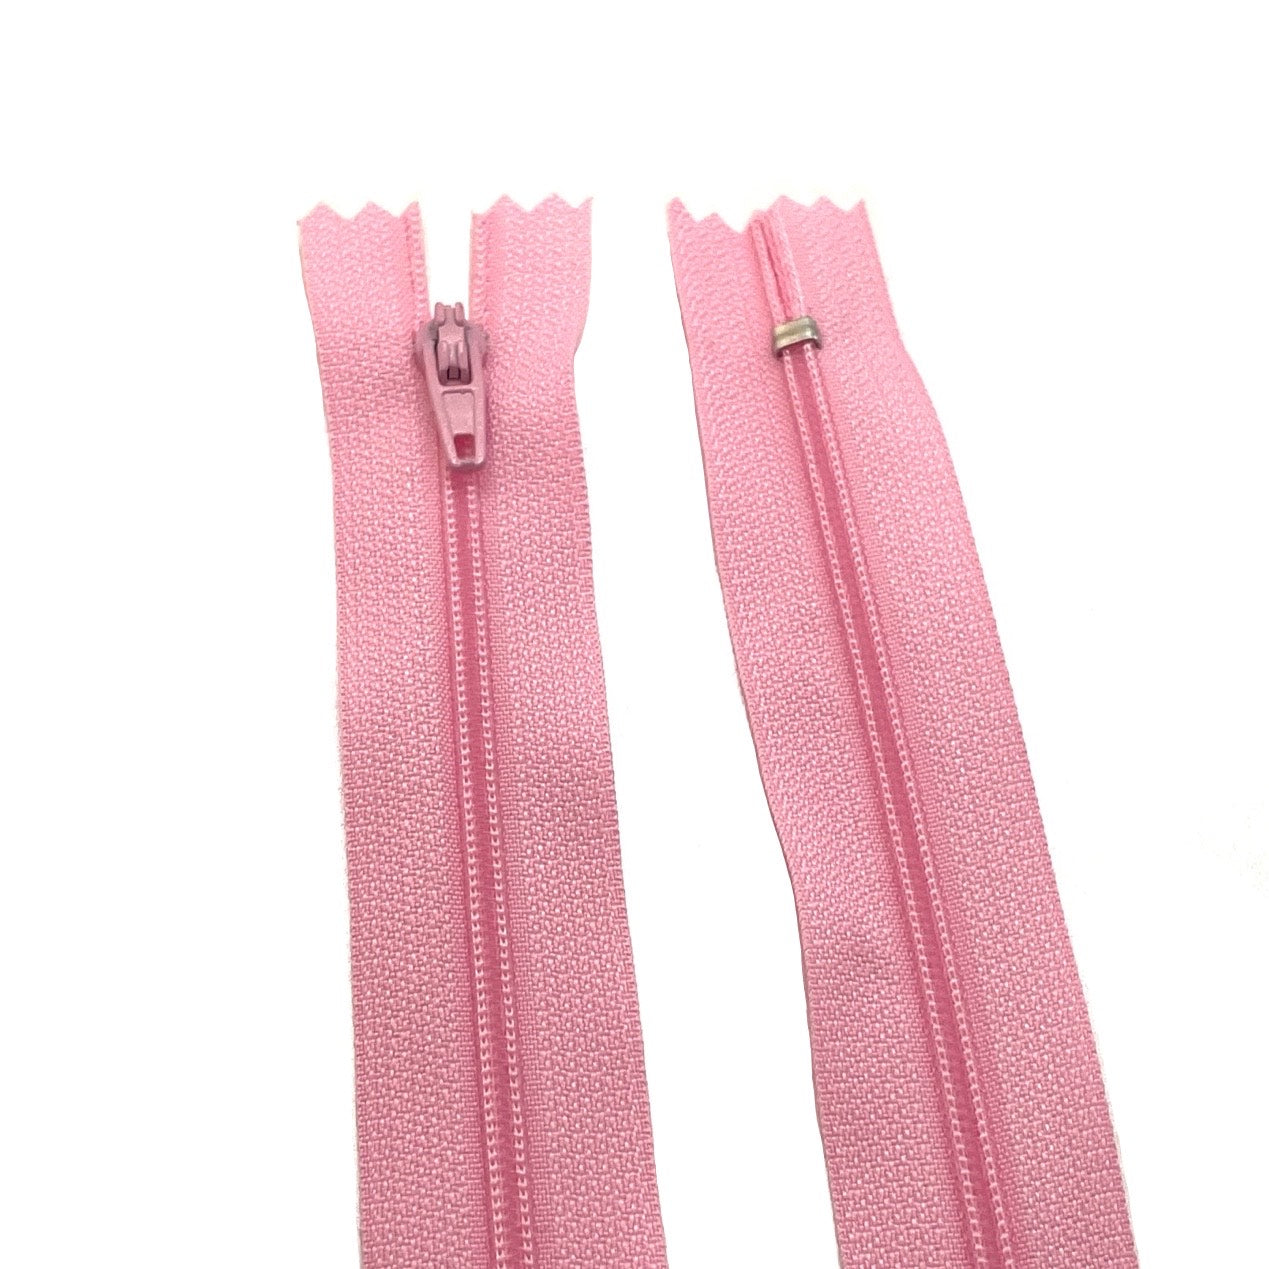 Photo of light pink nylon zips available in 25 colors and 5 sizes. Excellent quality zippers for craft and dressmaking purposes. Perfect for dresses, skirts, trousers, bags, purses, cushions, and numerous other projects. So many possibilities, so little time!